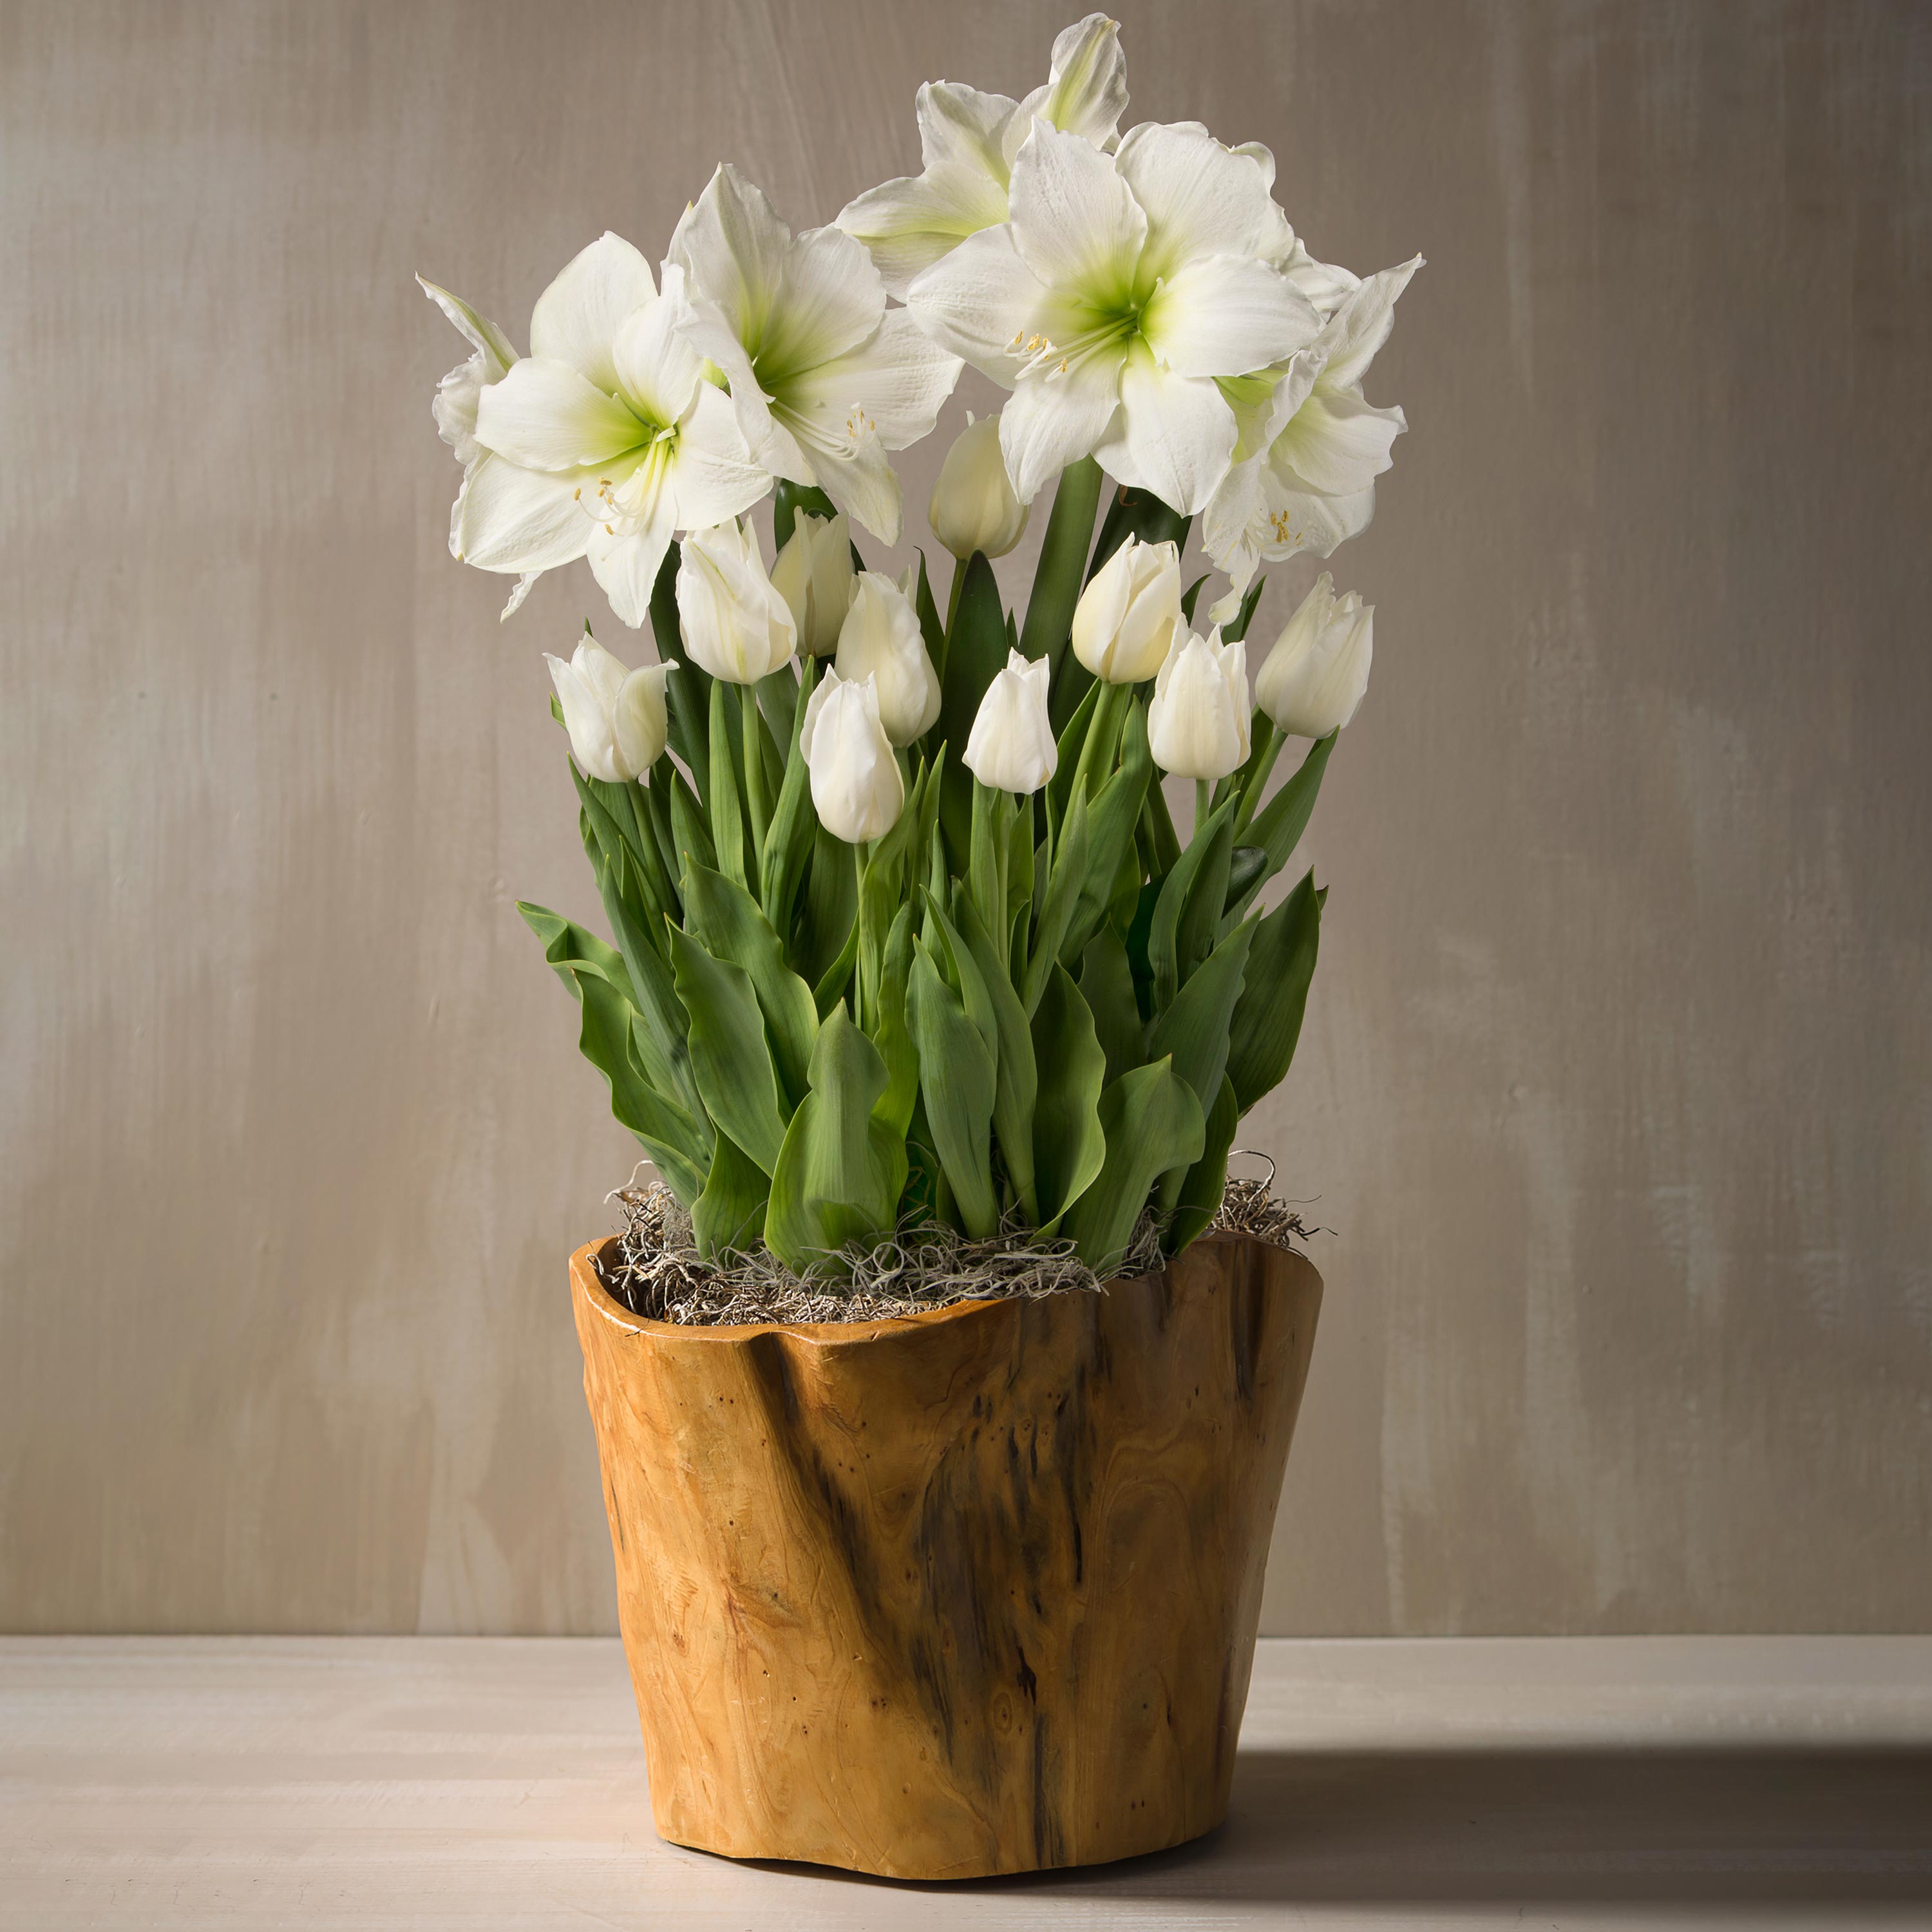 January Amaryllis and Tulip Bulbs in Root Bowl Basket